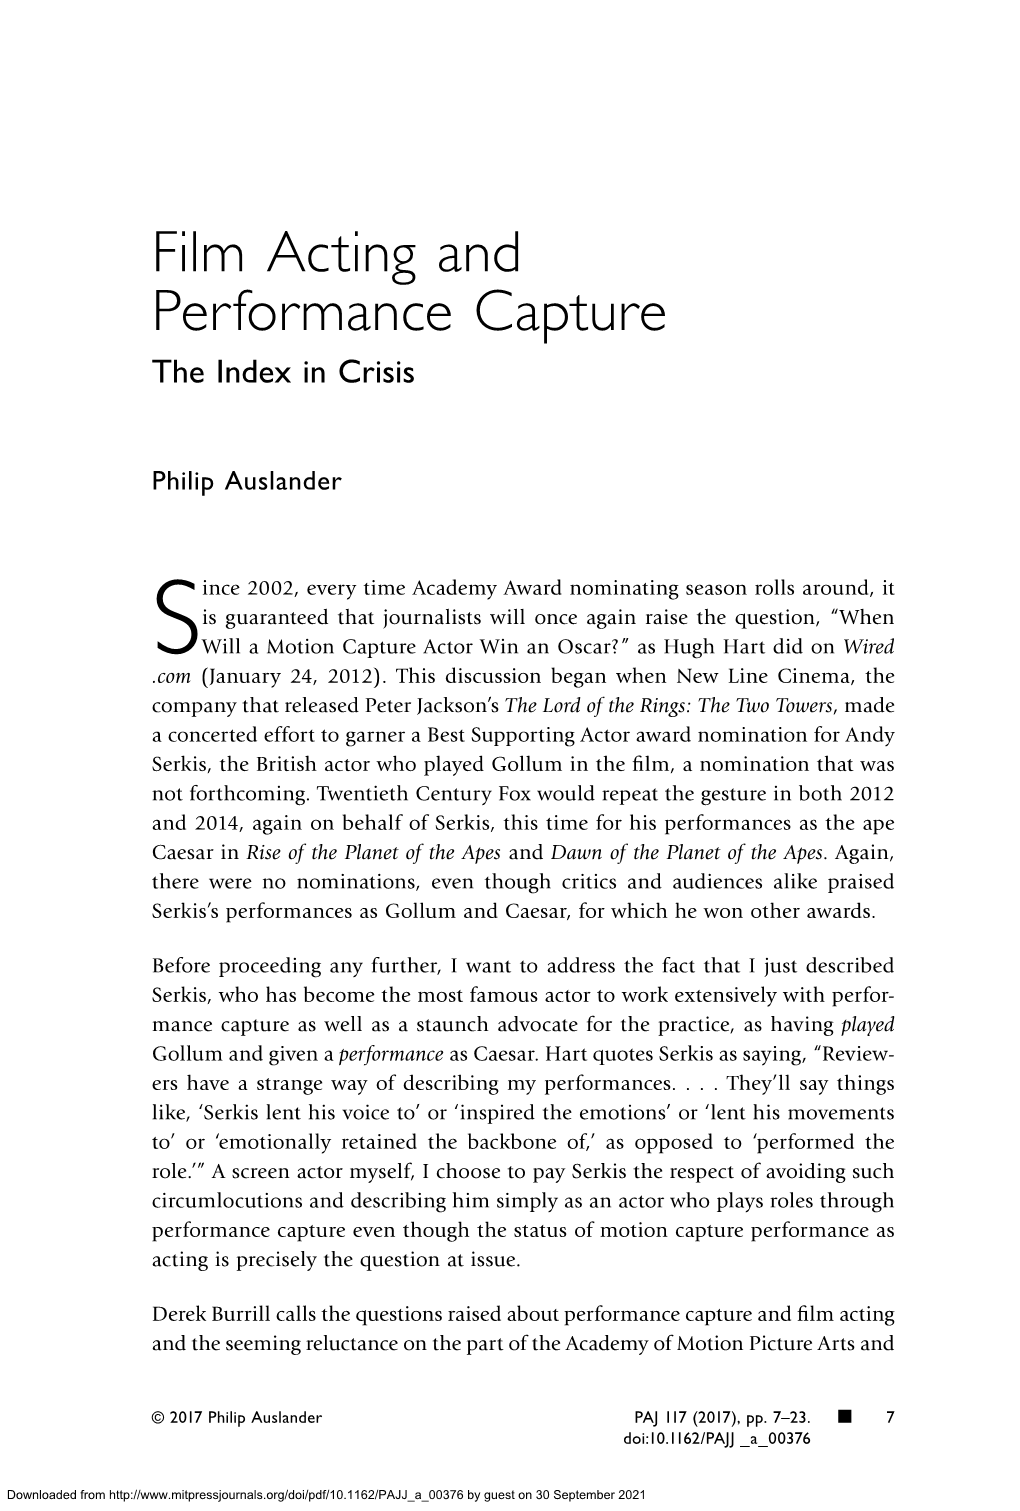 Film Acting and Performance Capture the Index in Crisis